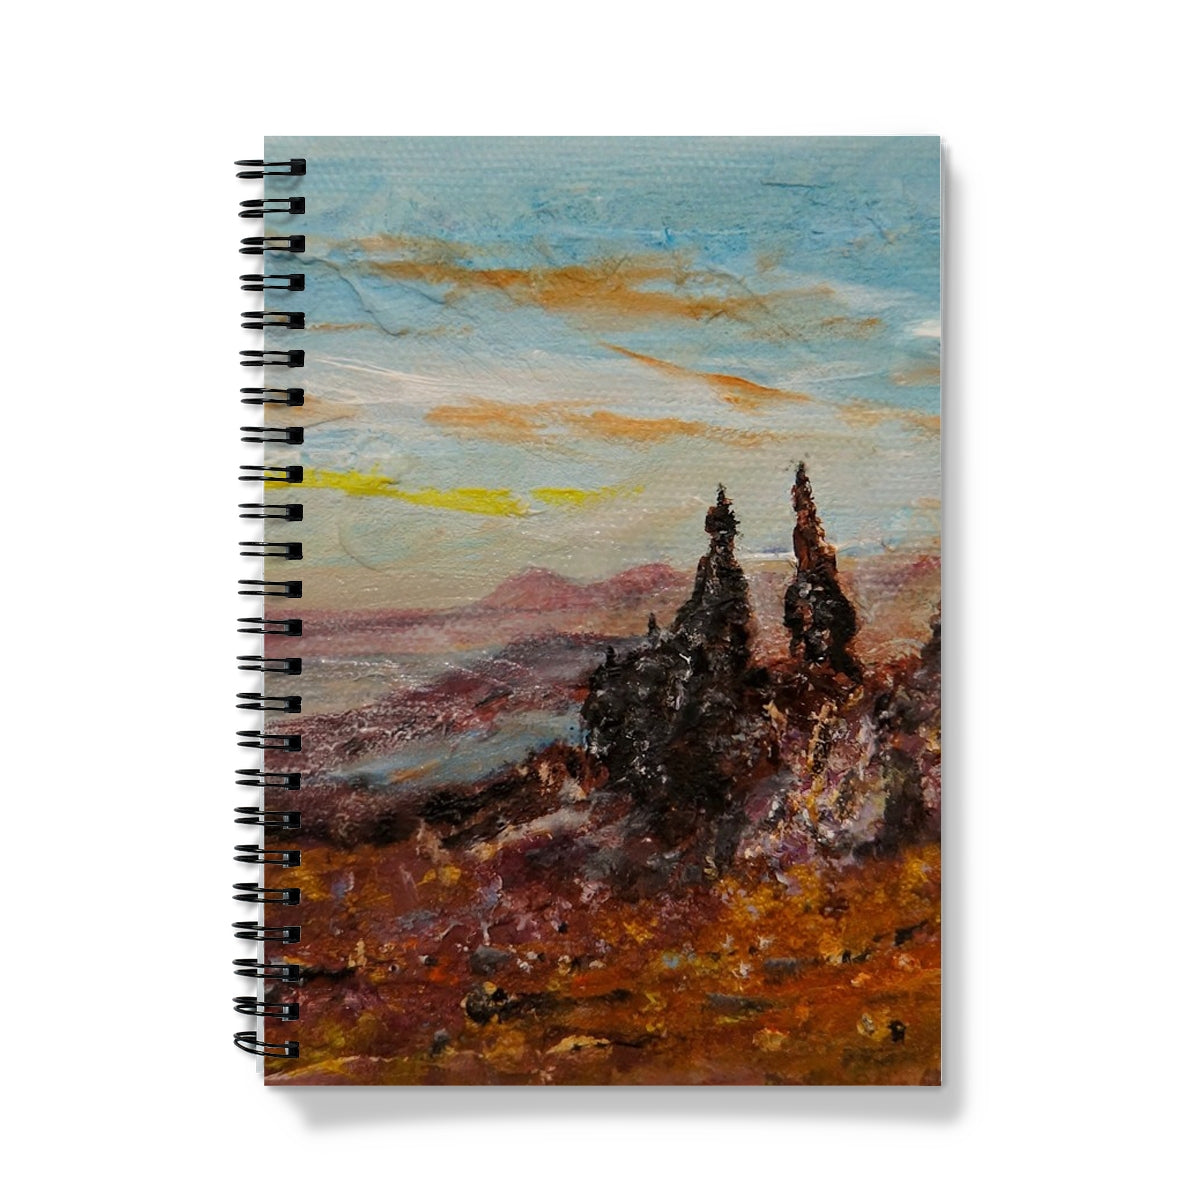 The Old Man Of Storr Skye Art Gifts Notebook-Journals & Notebooks-Skye Art Gallery-A4-Lined-Paintings, Prints, Homeware, Art Gifts From Scotland By Scottish Artist Kevin Hunter